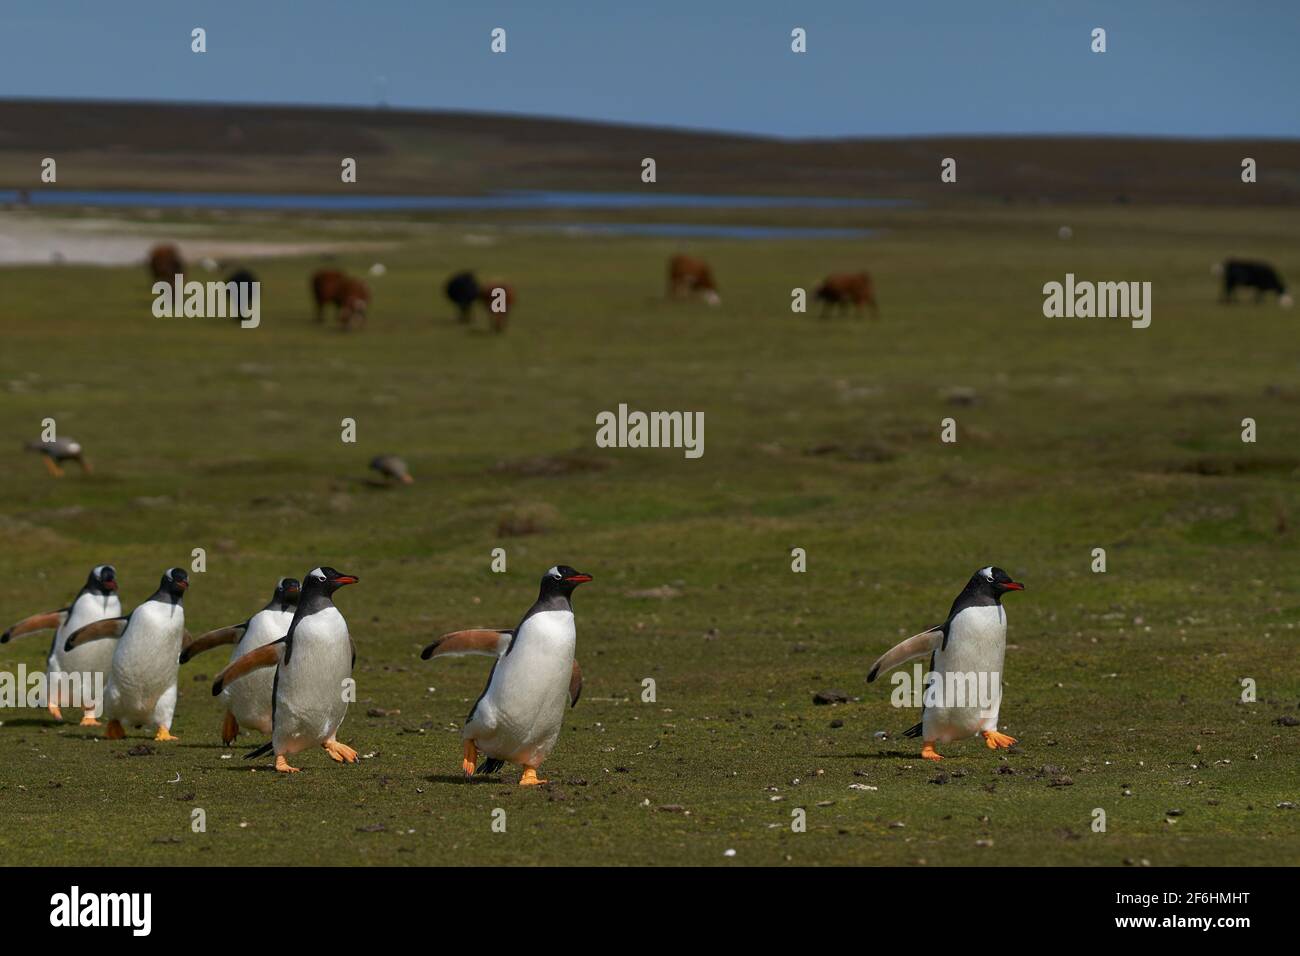 Gentoo Penguins (Pygoscelis papua) returning to the colony across grassland grazed by cattle on Bleaker Island in the Falkland Islands. Stock Photo